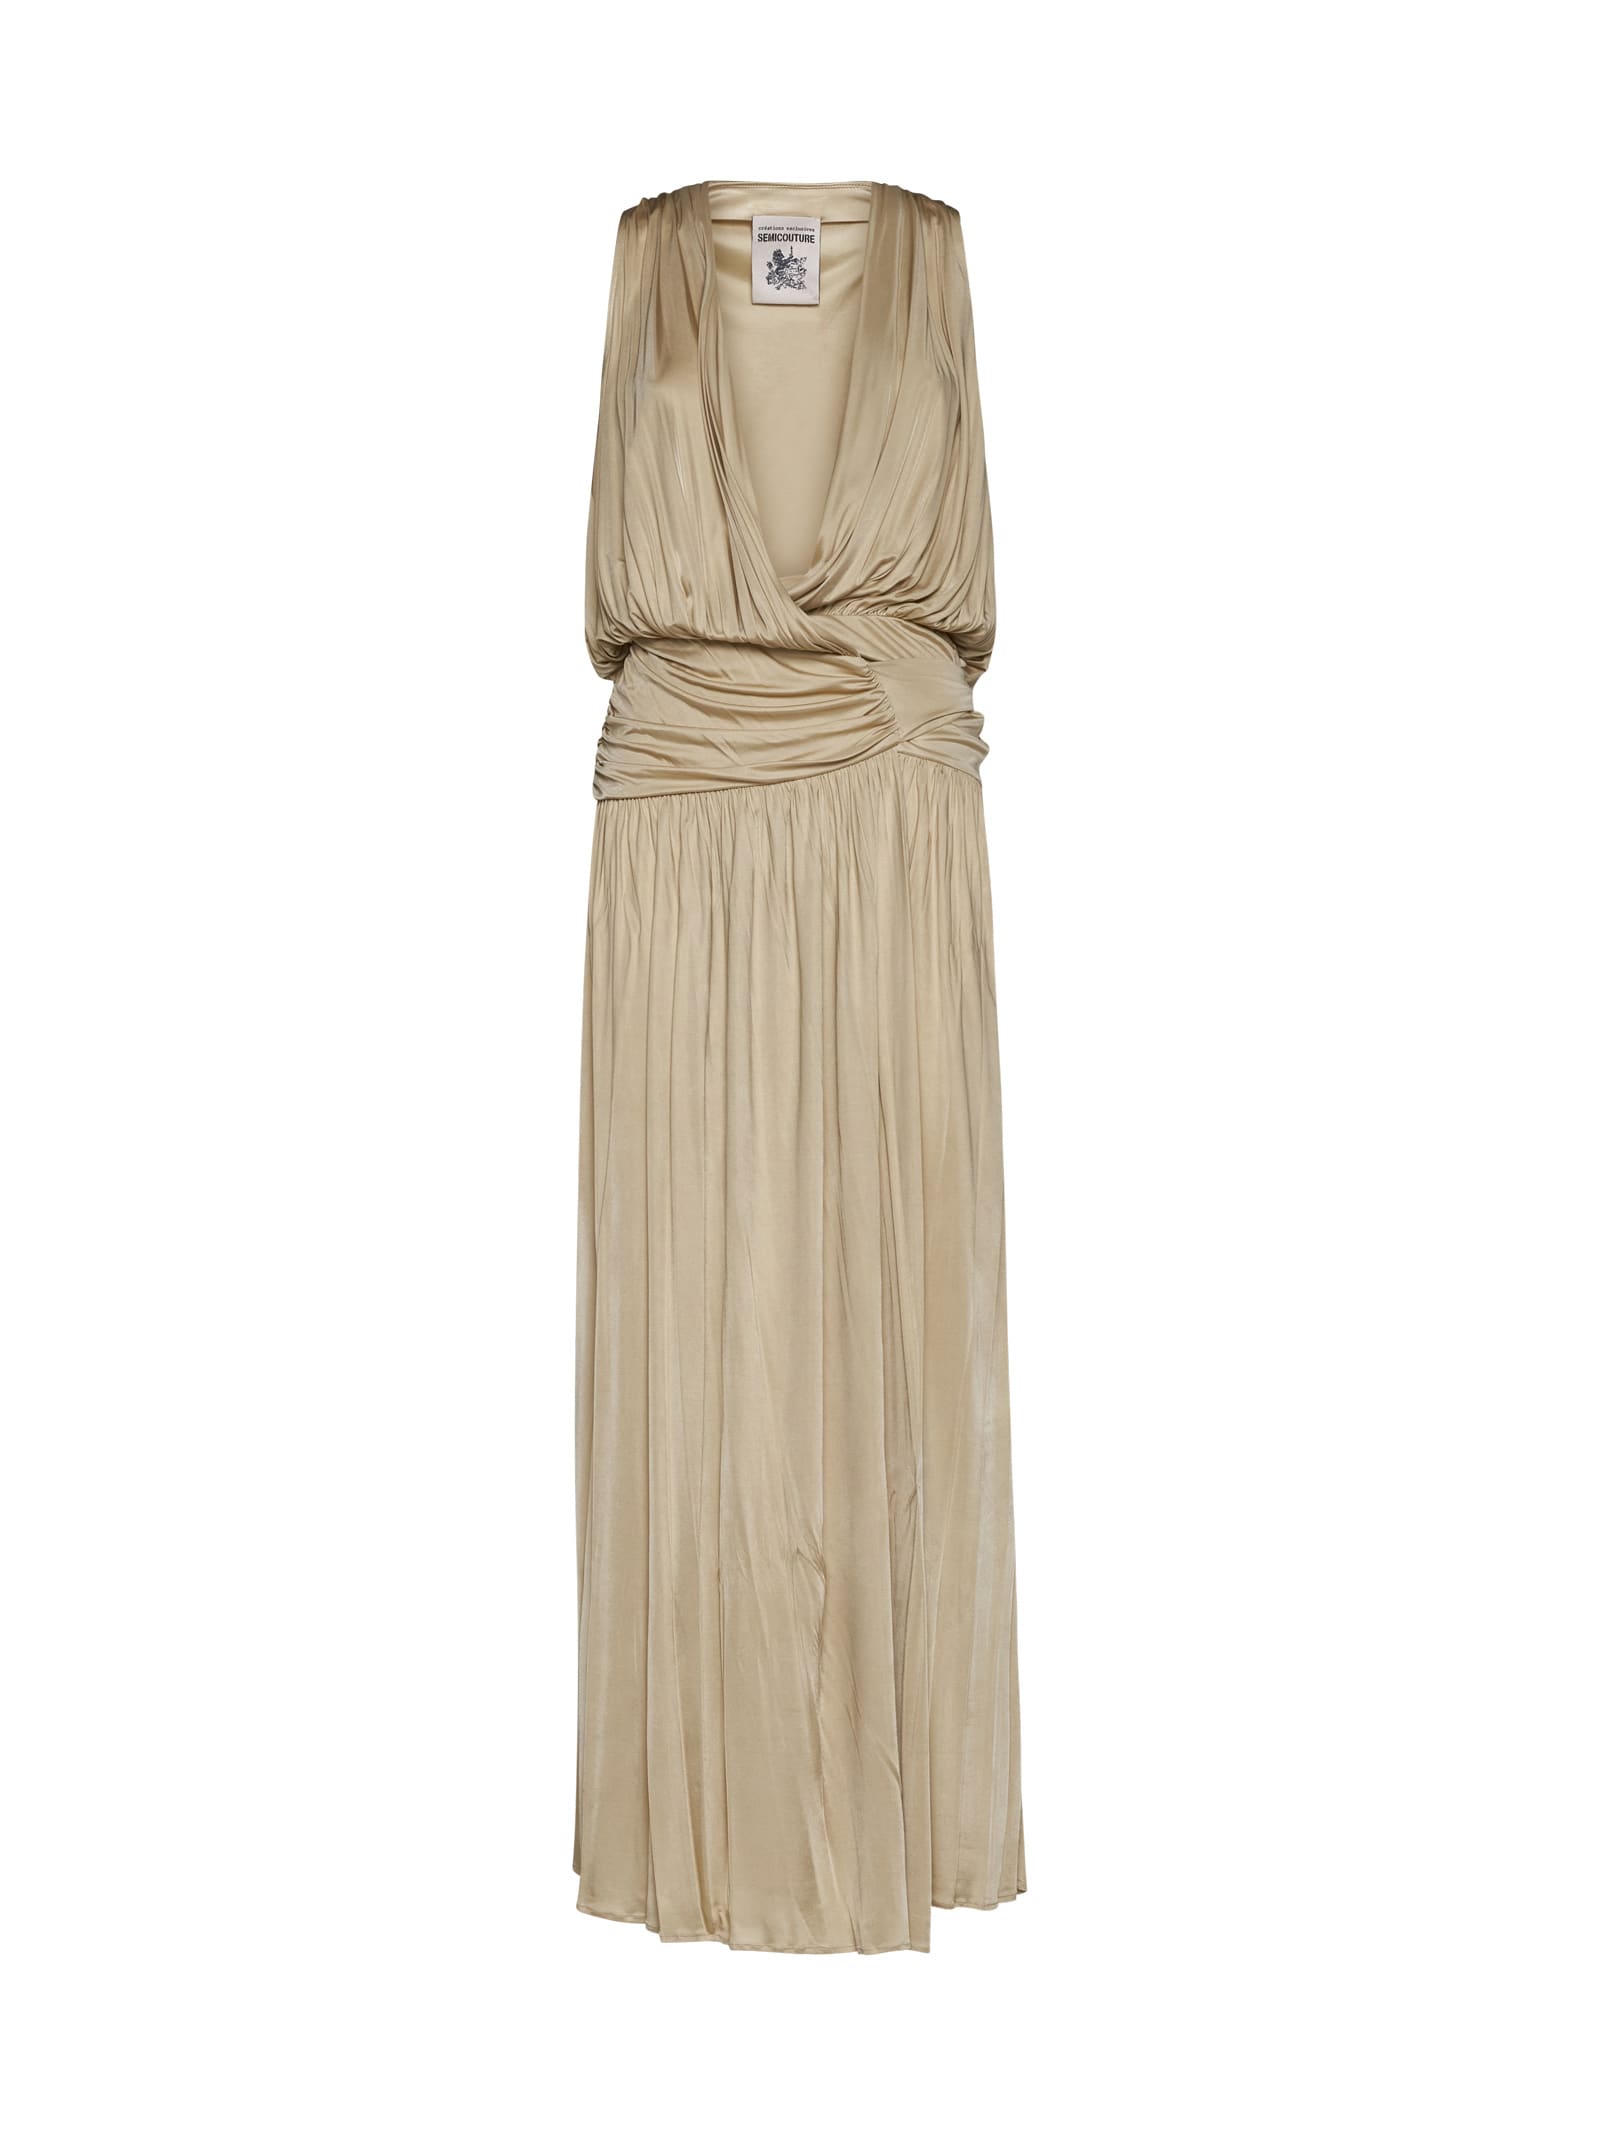 Shop Semicouture Dress In Camel Light